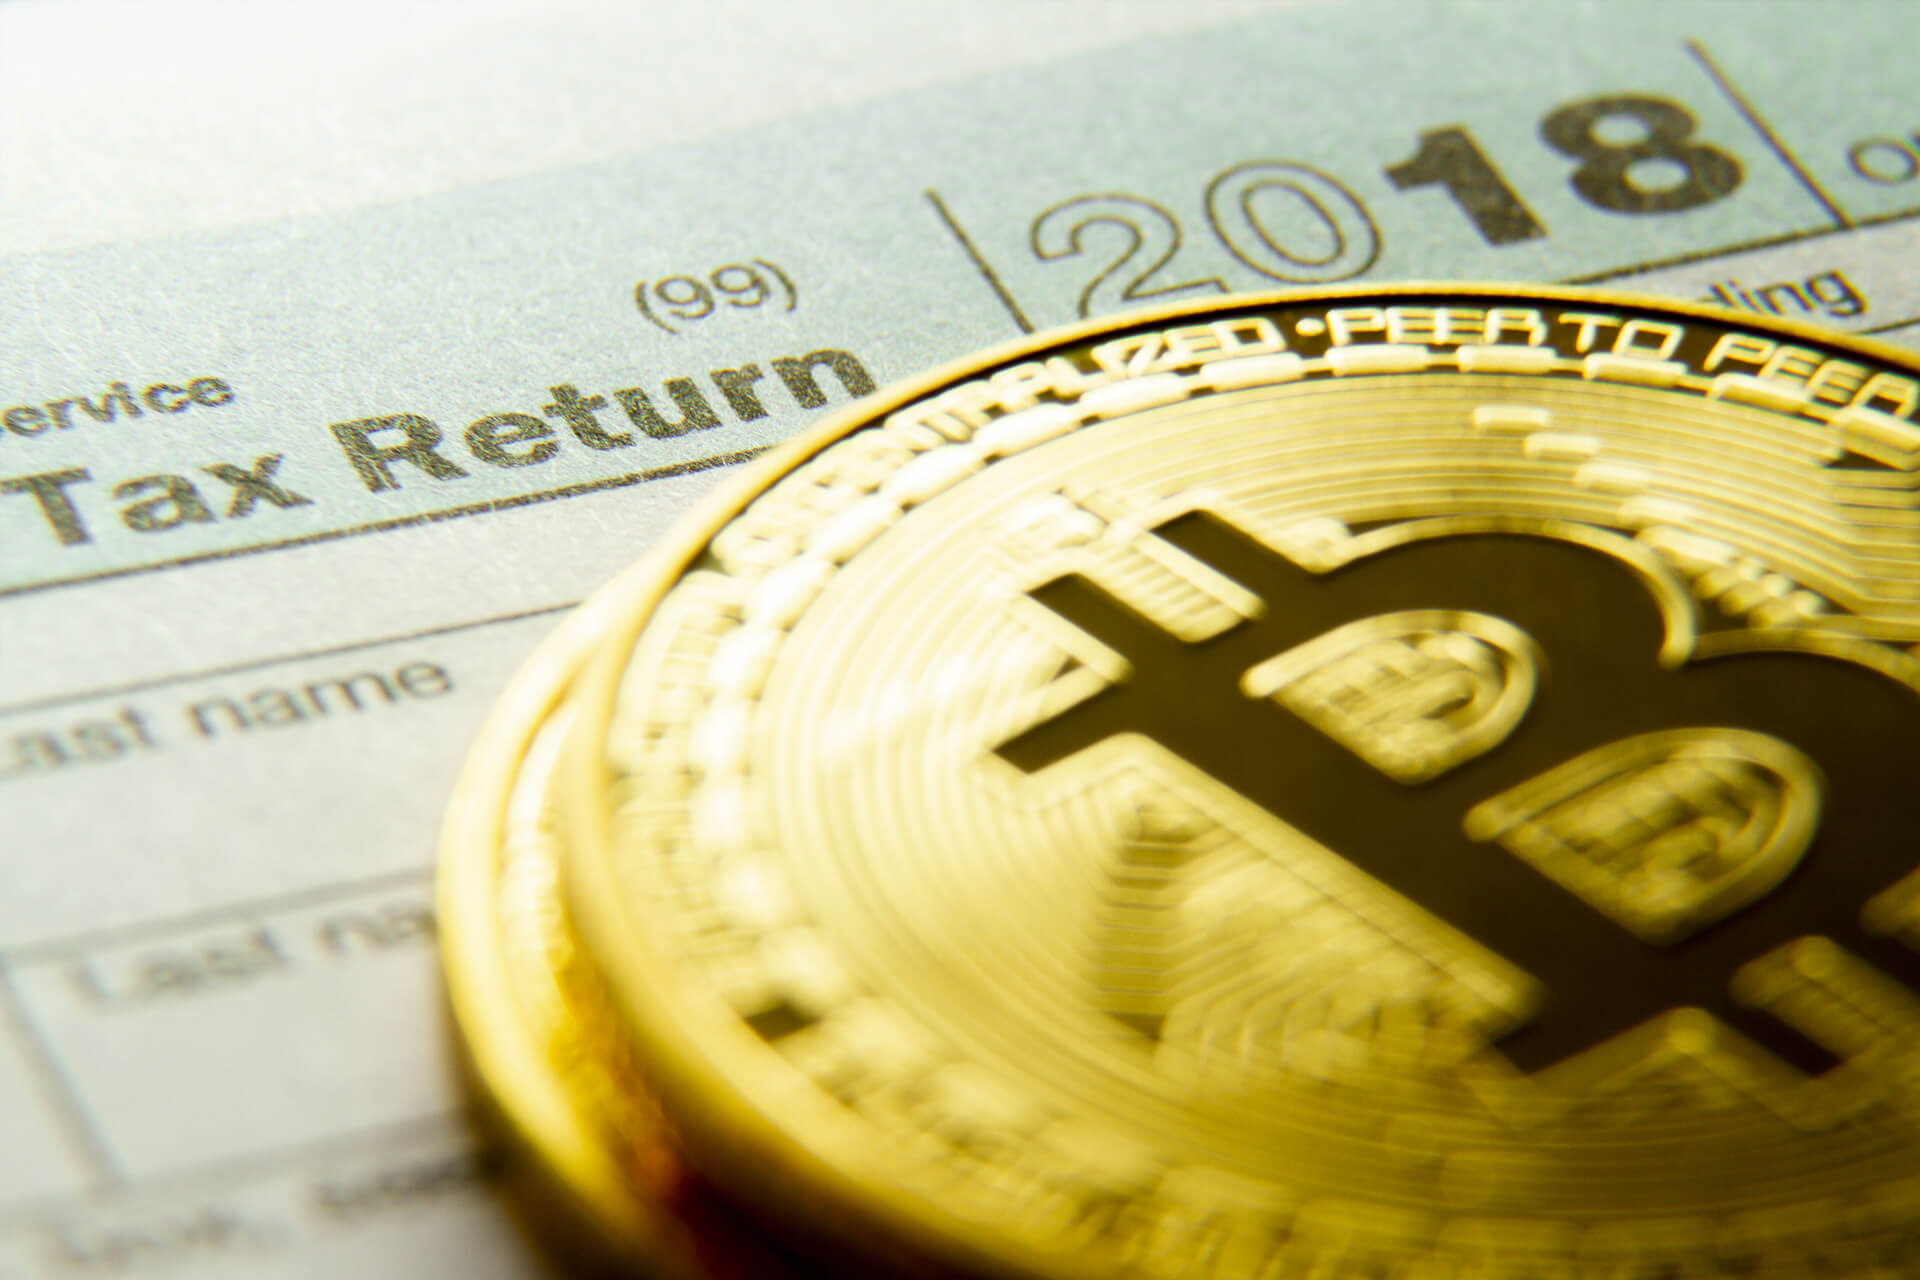 buying and reselling bitcoin taxes